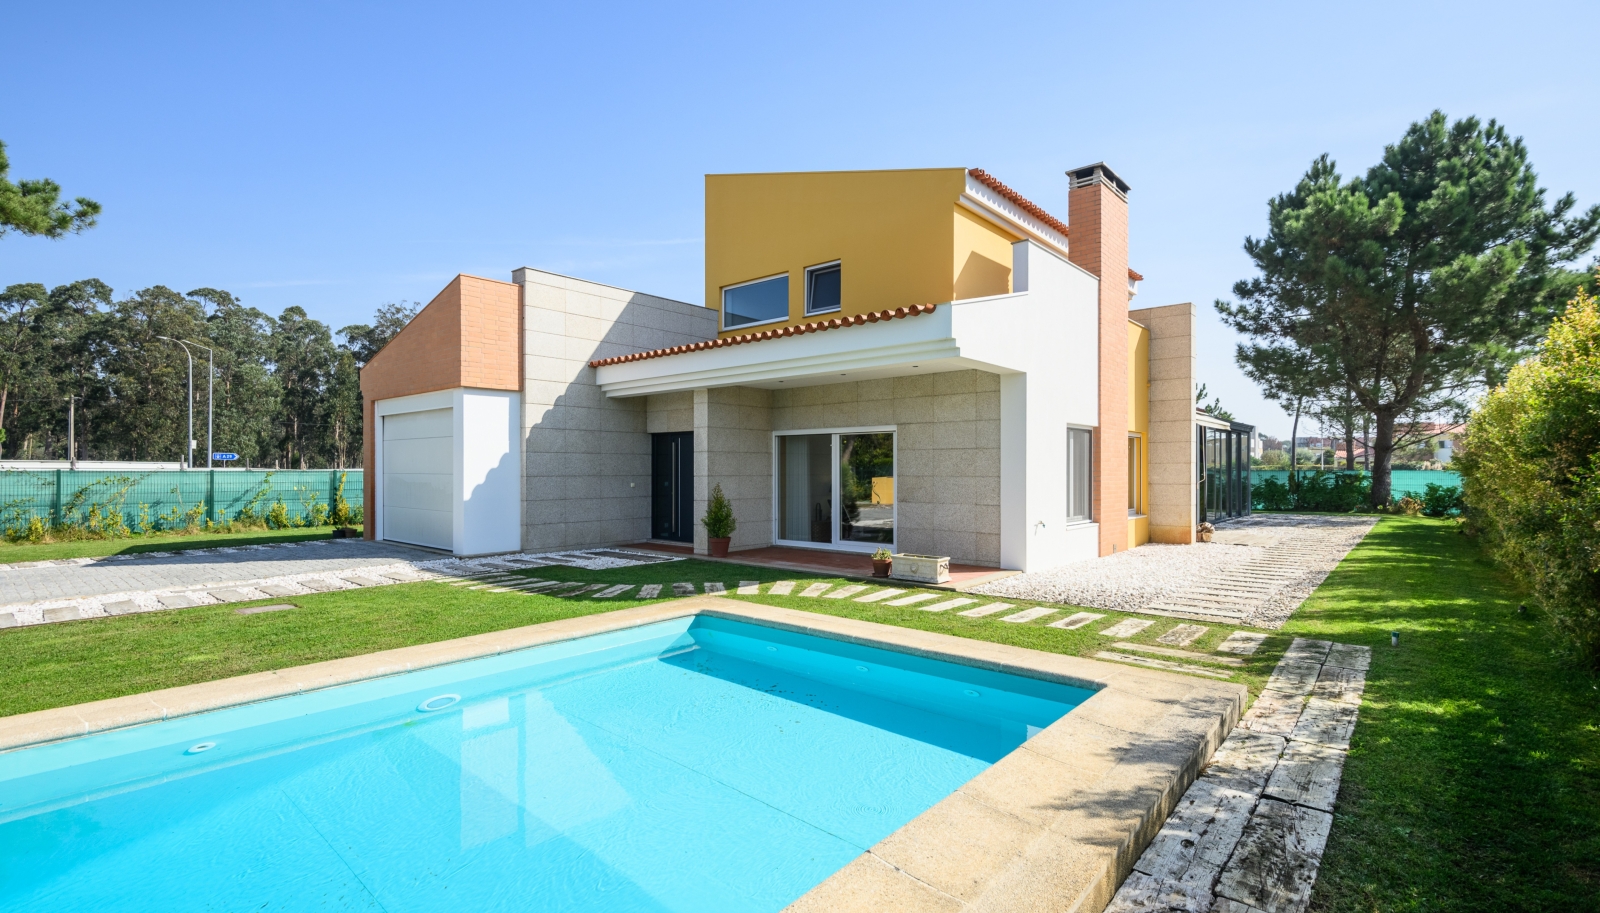 Four-bedroom house with pool for sale - Furadouro - Ovar - Portugal_240474